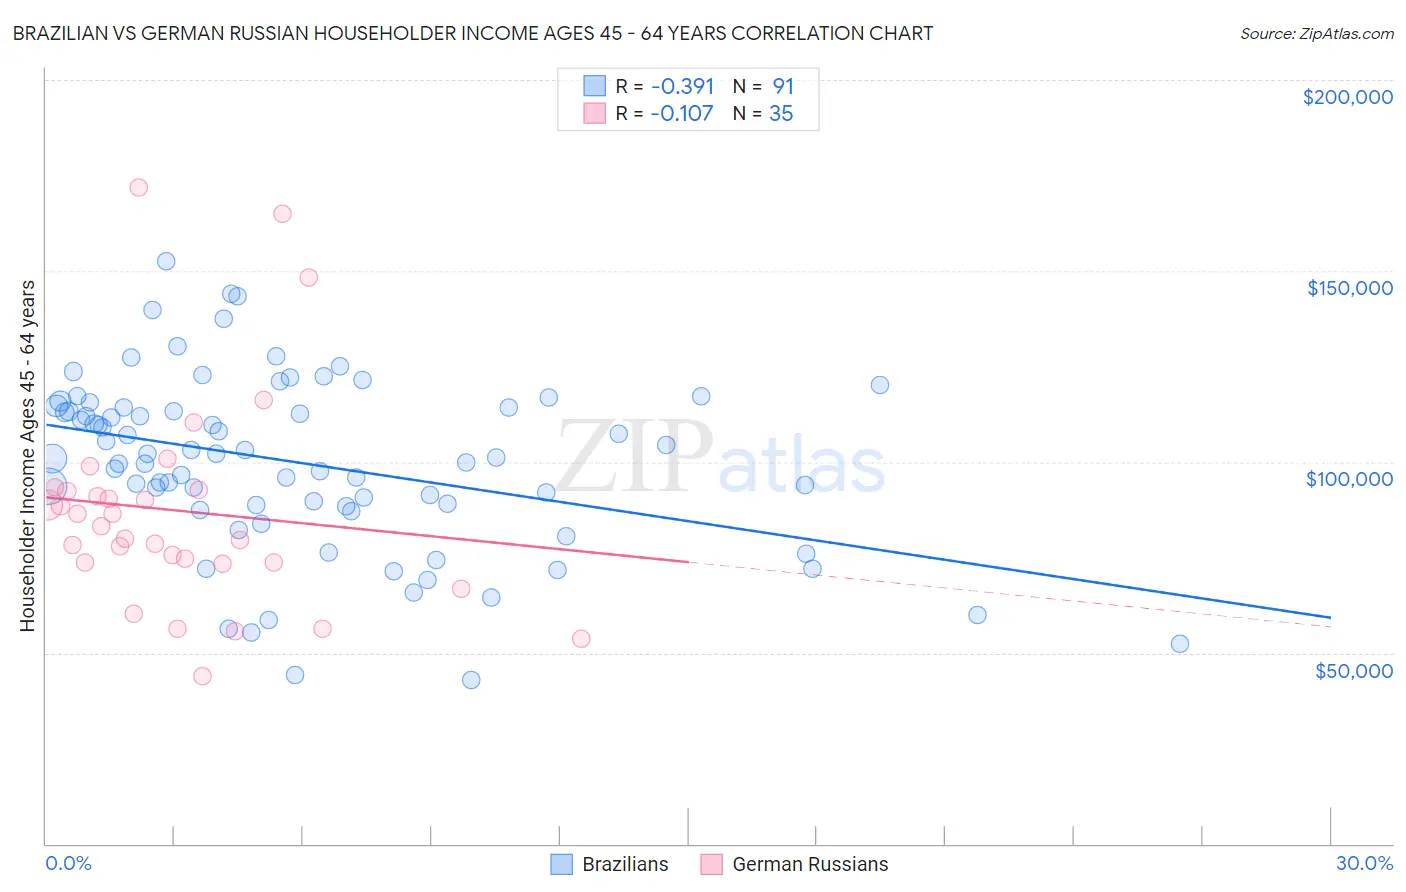 Brazilian vs German Russian Householder Income Ages 45 - 64 years